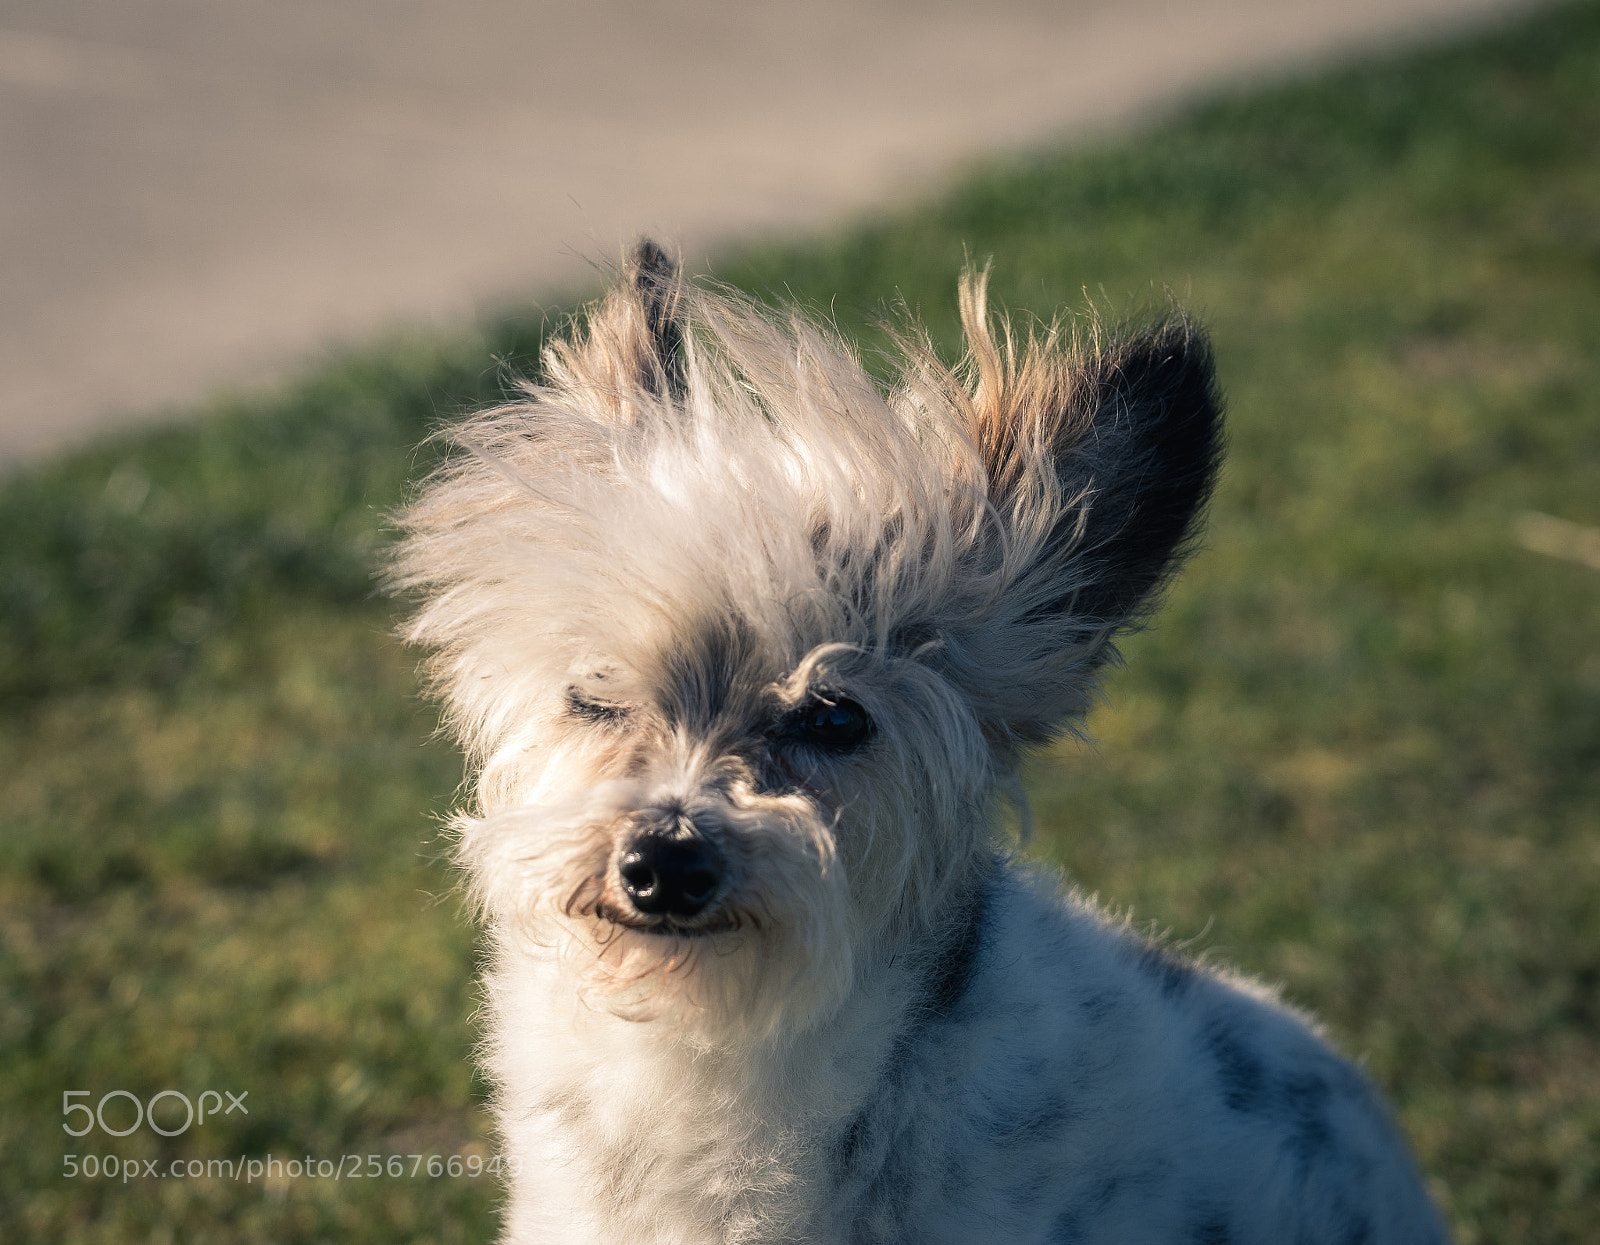 Sony a7 II sample photo. Dog with great hair photography